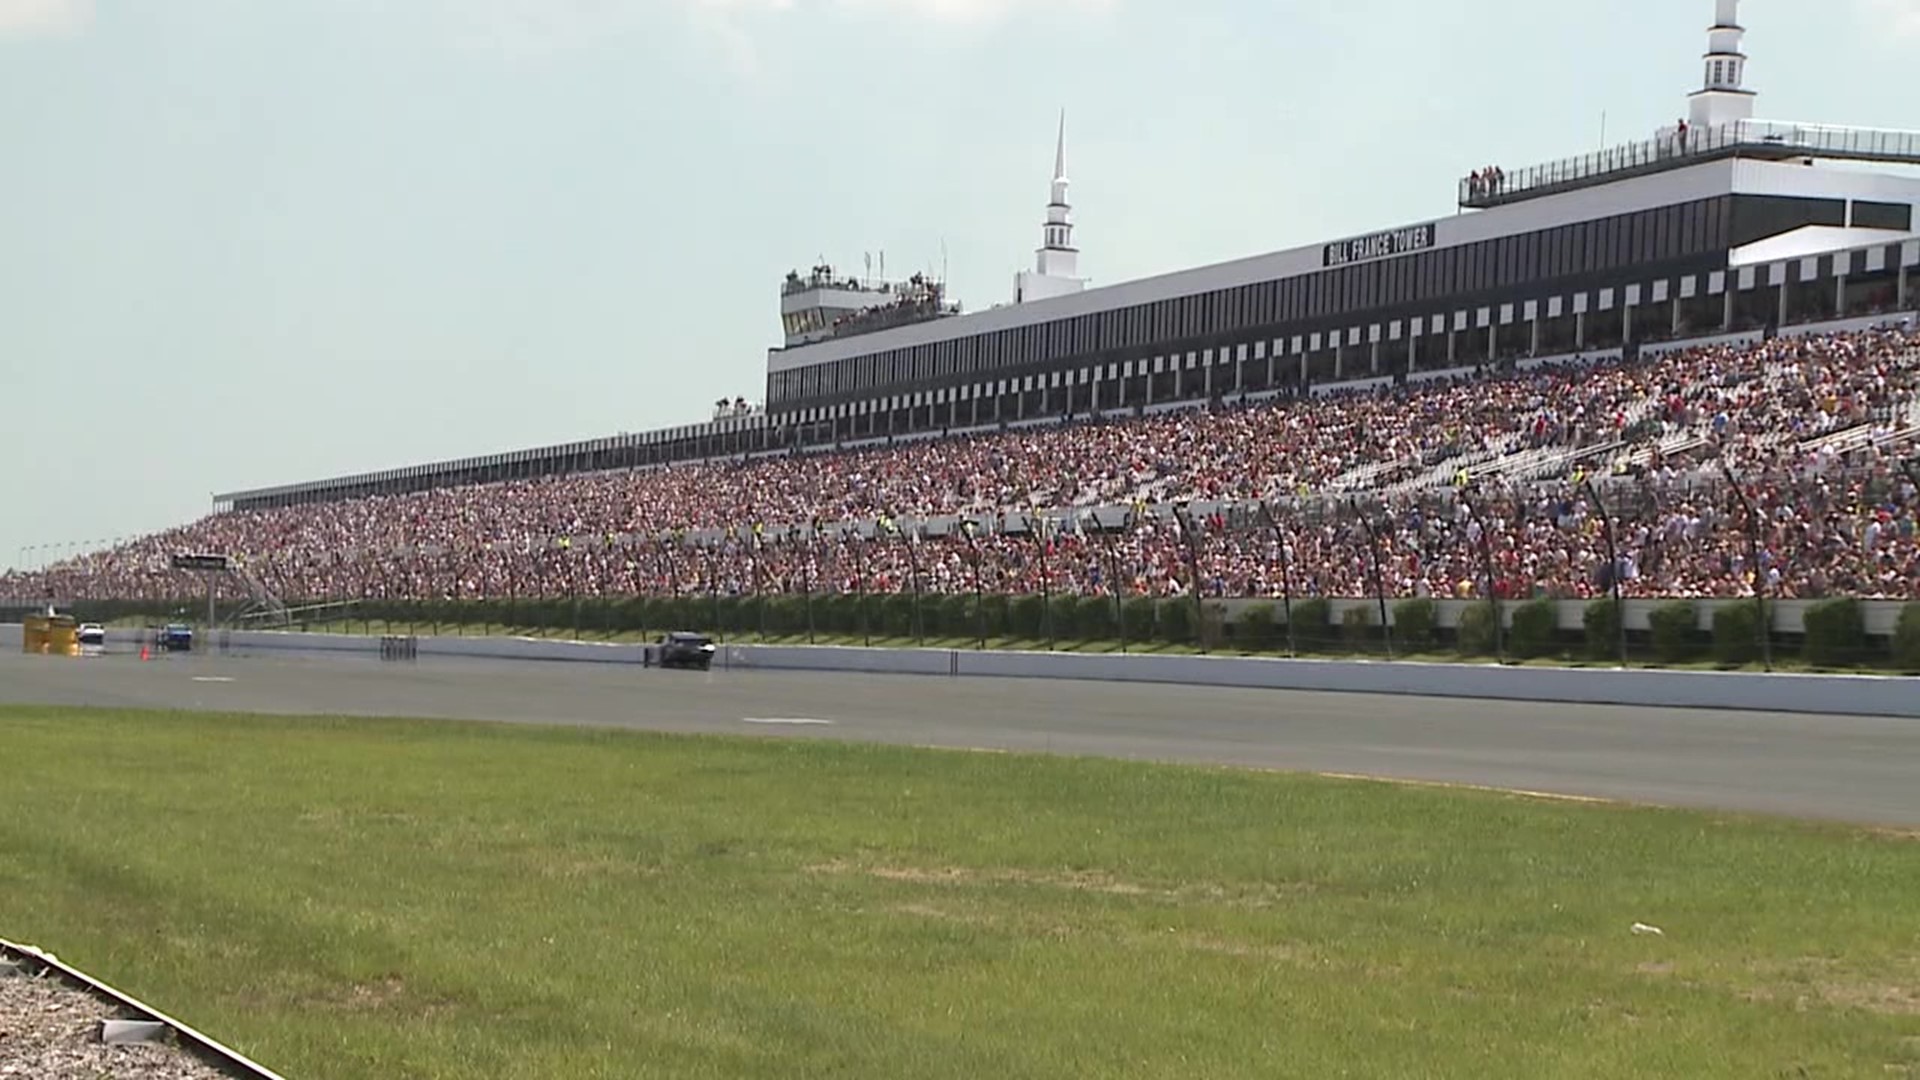 After PA lifted all outdoor restrictions on Memorial Day, Pocono Raceway announced it’ll return this summer at 100%.